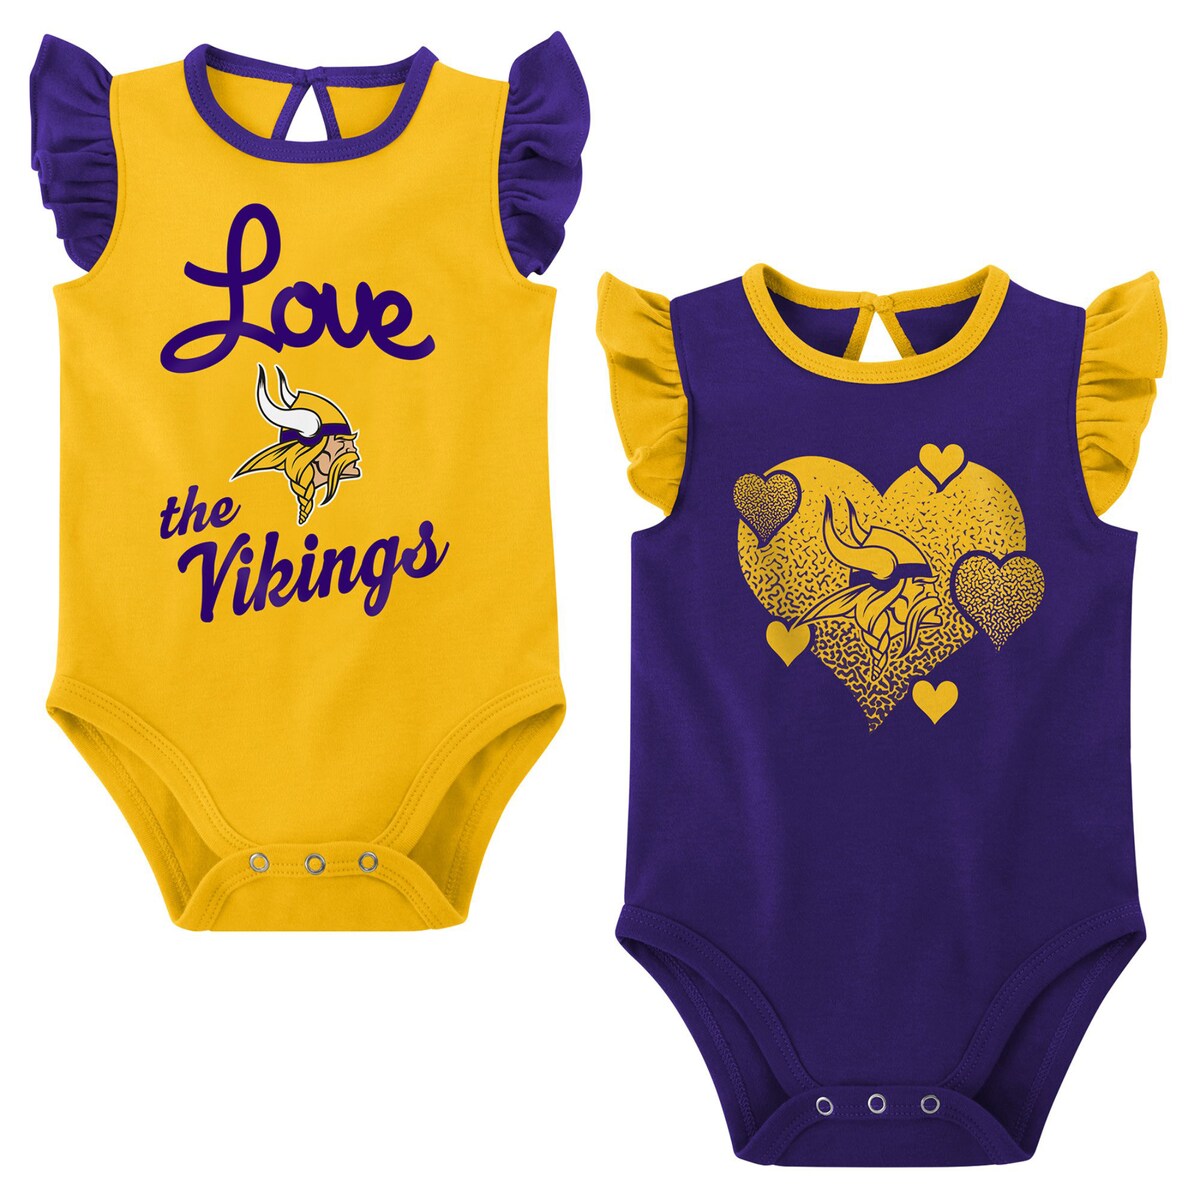 You can make your kiddo the newest and cutest Minnesota Vikings fan ever by grabbing this Spread the Love 2-pack bodysuit set! These bodysuits feature incredibly cute Minnesota Vikings graphics and have a keyhole back with a button as well as three snaps at the bottom for easy dressing. You'll be able to help your youngster express their newfound devotion easily by grabbing this set.Ruffled cap sleevesImportedOfficially licensedMachine wash with garment inside out, tumble dry lowBrand: OuterstuffMaterial: 100% CottonKeyhole back with button closureSet includes: Two bodysuitsScreen-print graphicsThree snap-buttons at bottom